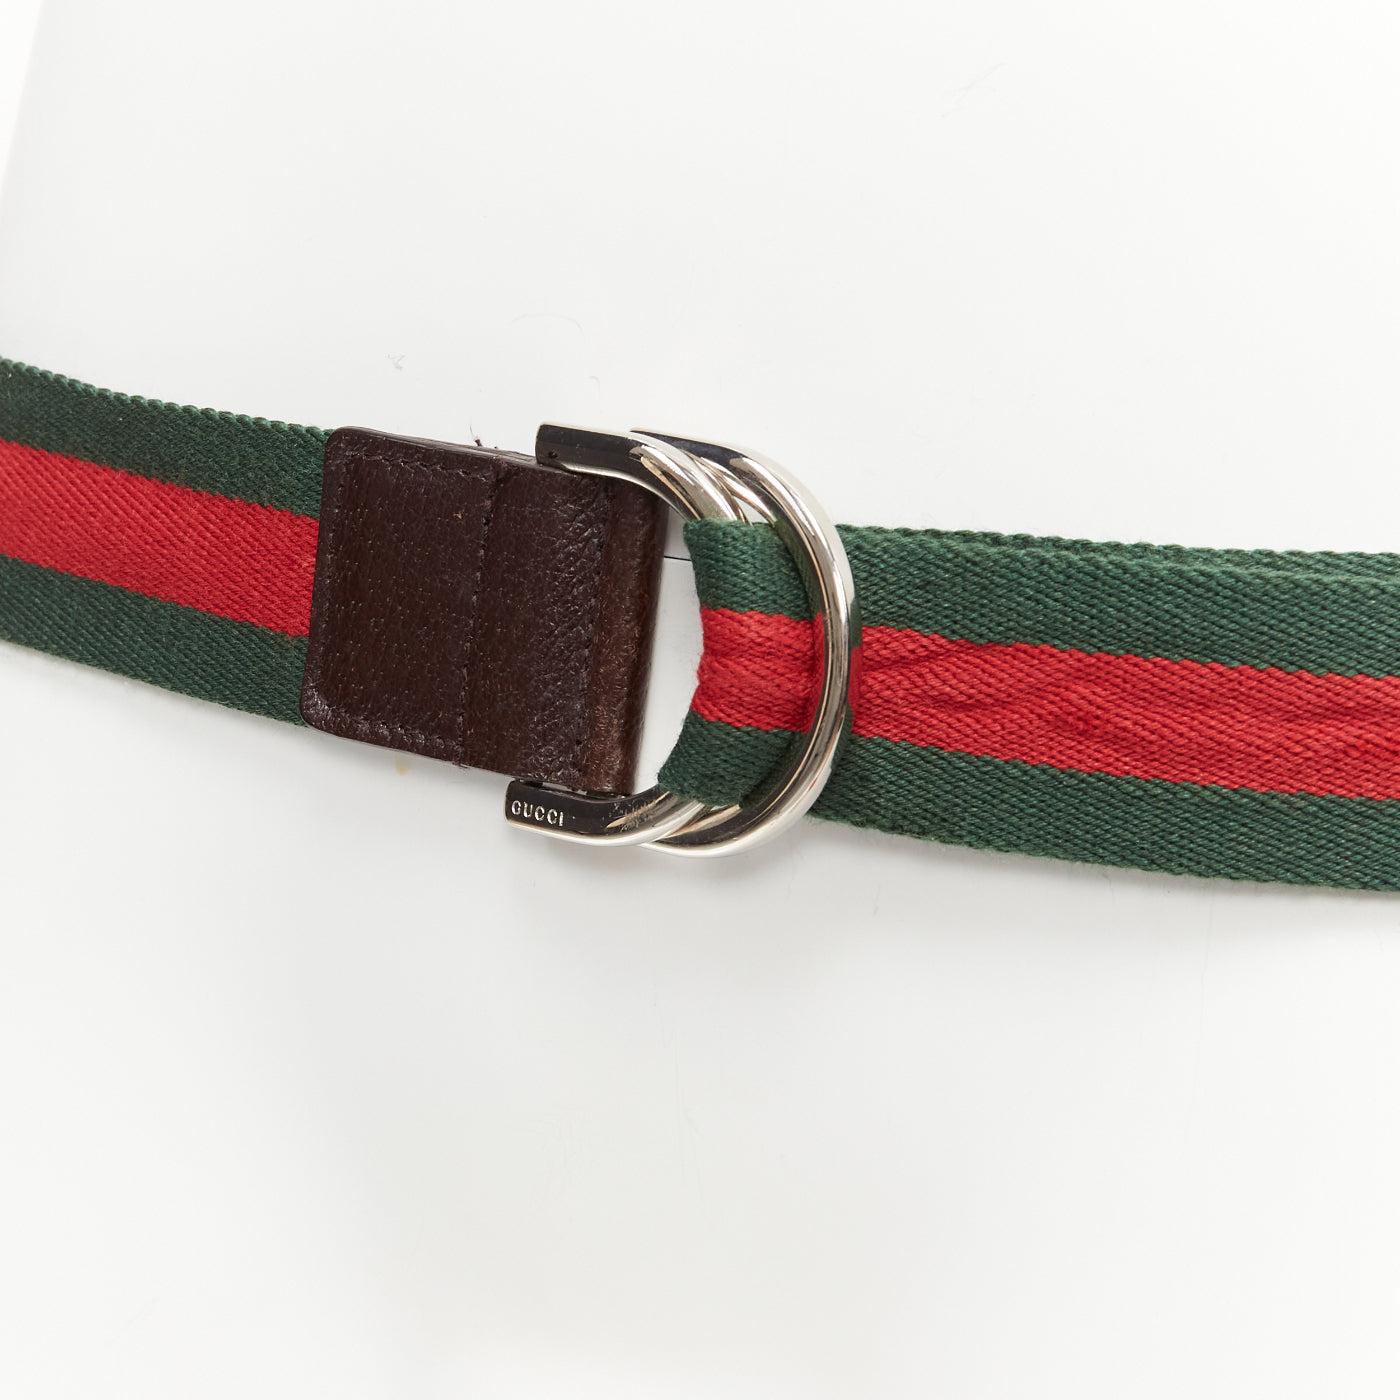 GUCCI green red web fabric silver logo D-ring brown leather belt
Reference: CNLE/A00270
Brand: Gucci
Material: Fabric, Leather
Color: Brown, Red
Pattern: Striped
Closure: Belt
Lining: Red Fabric
Extra Details: Discreet logo engraved on buckle.
Made